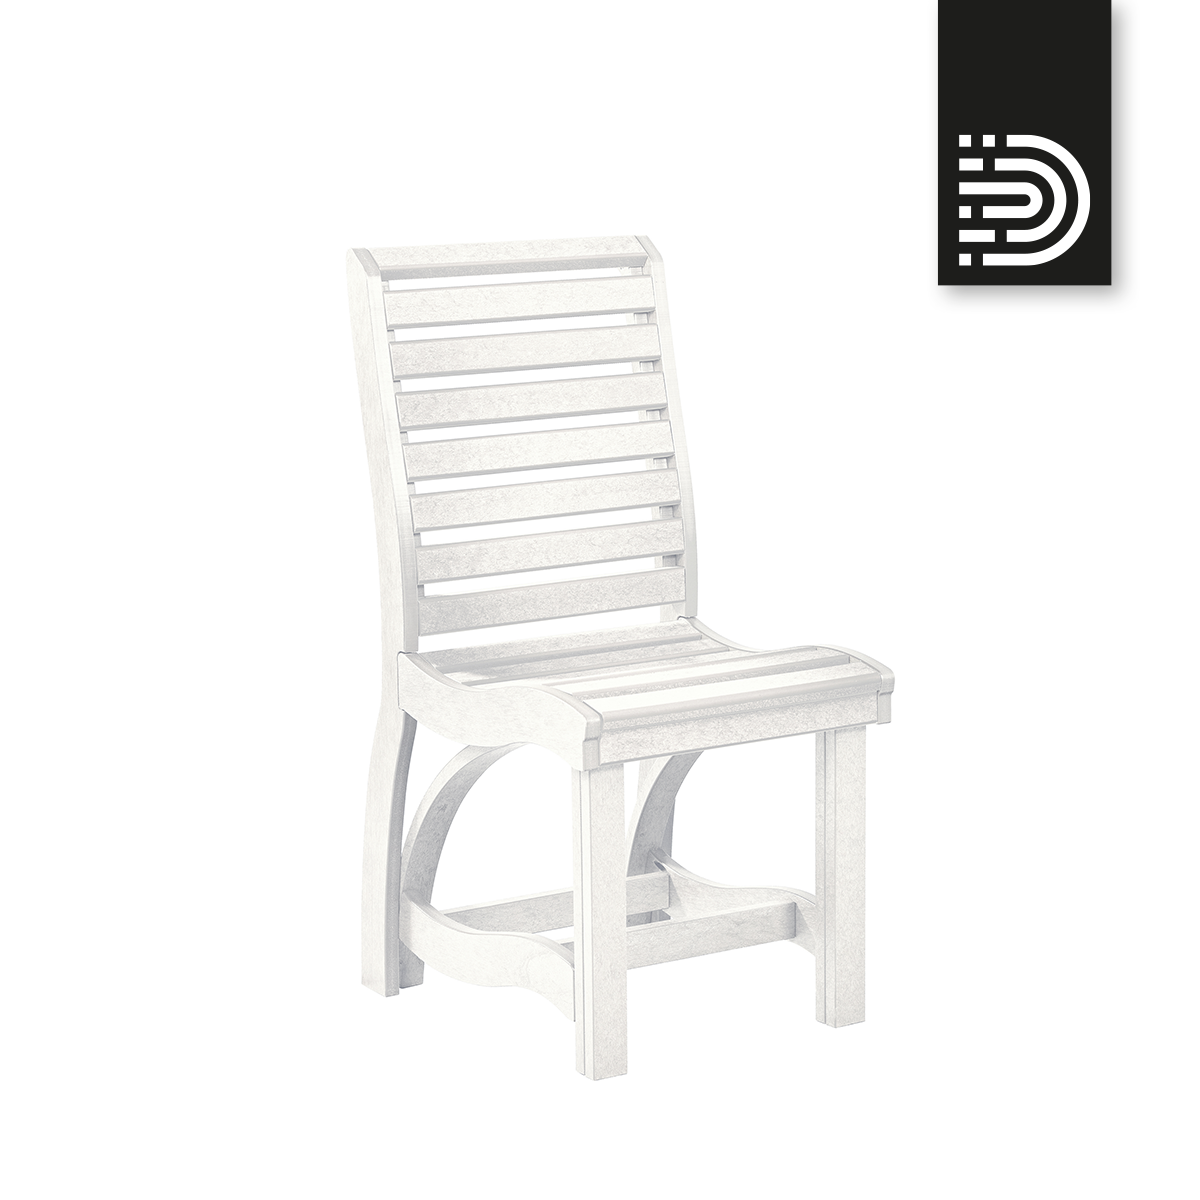 C35 Dining Side Chair - white 02